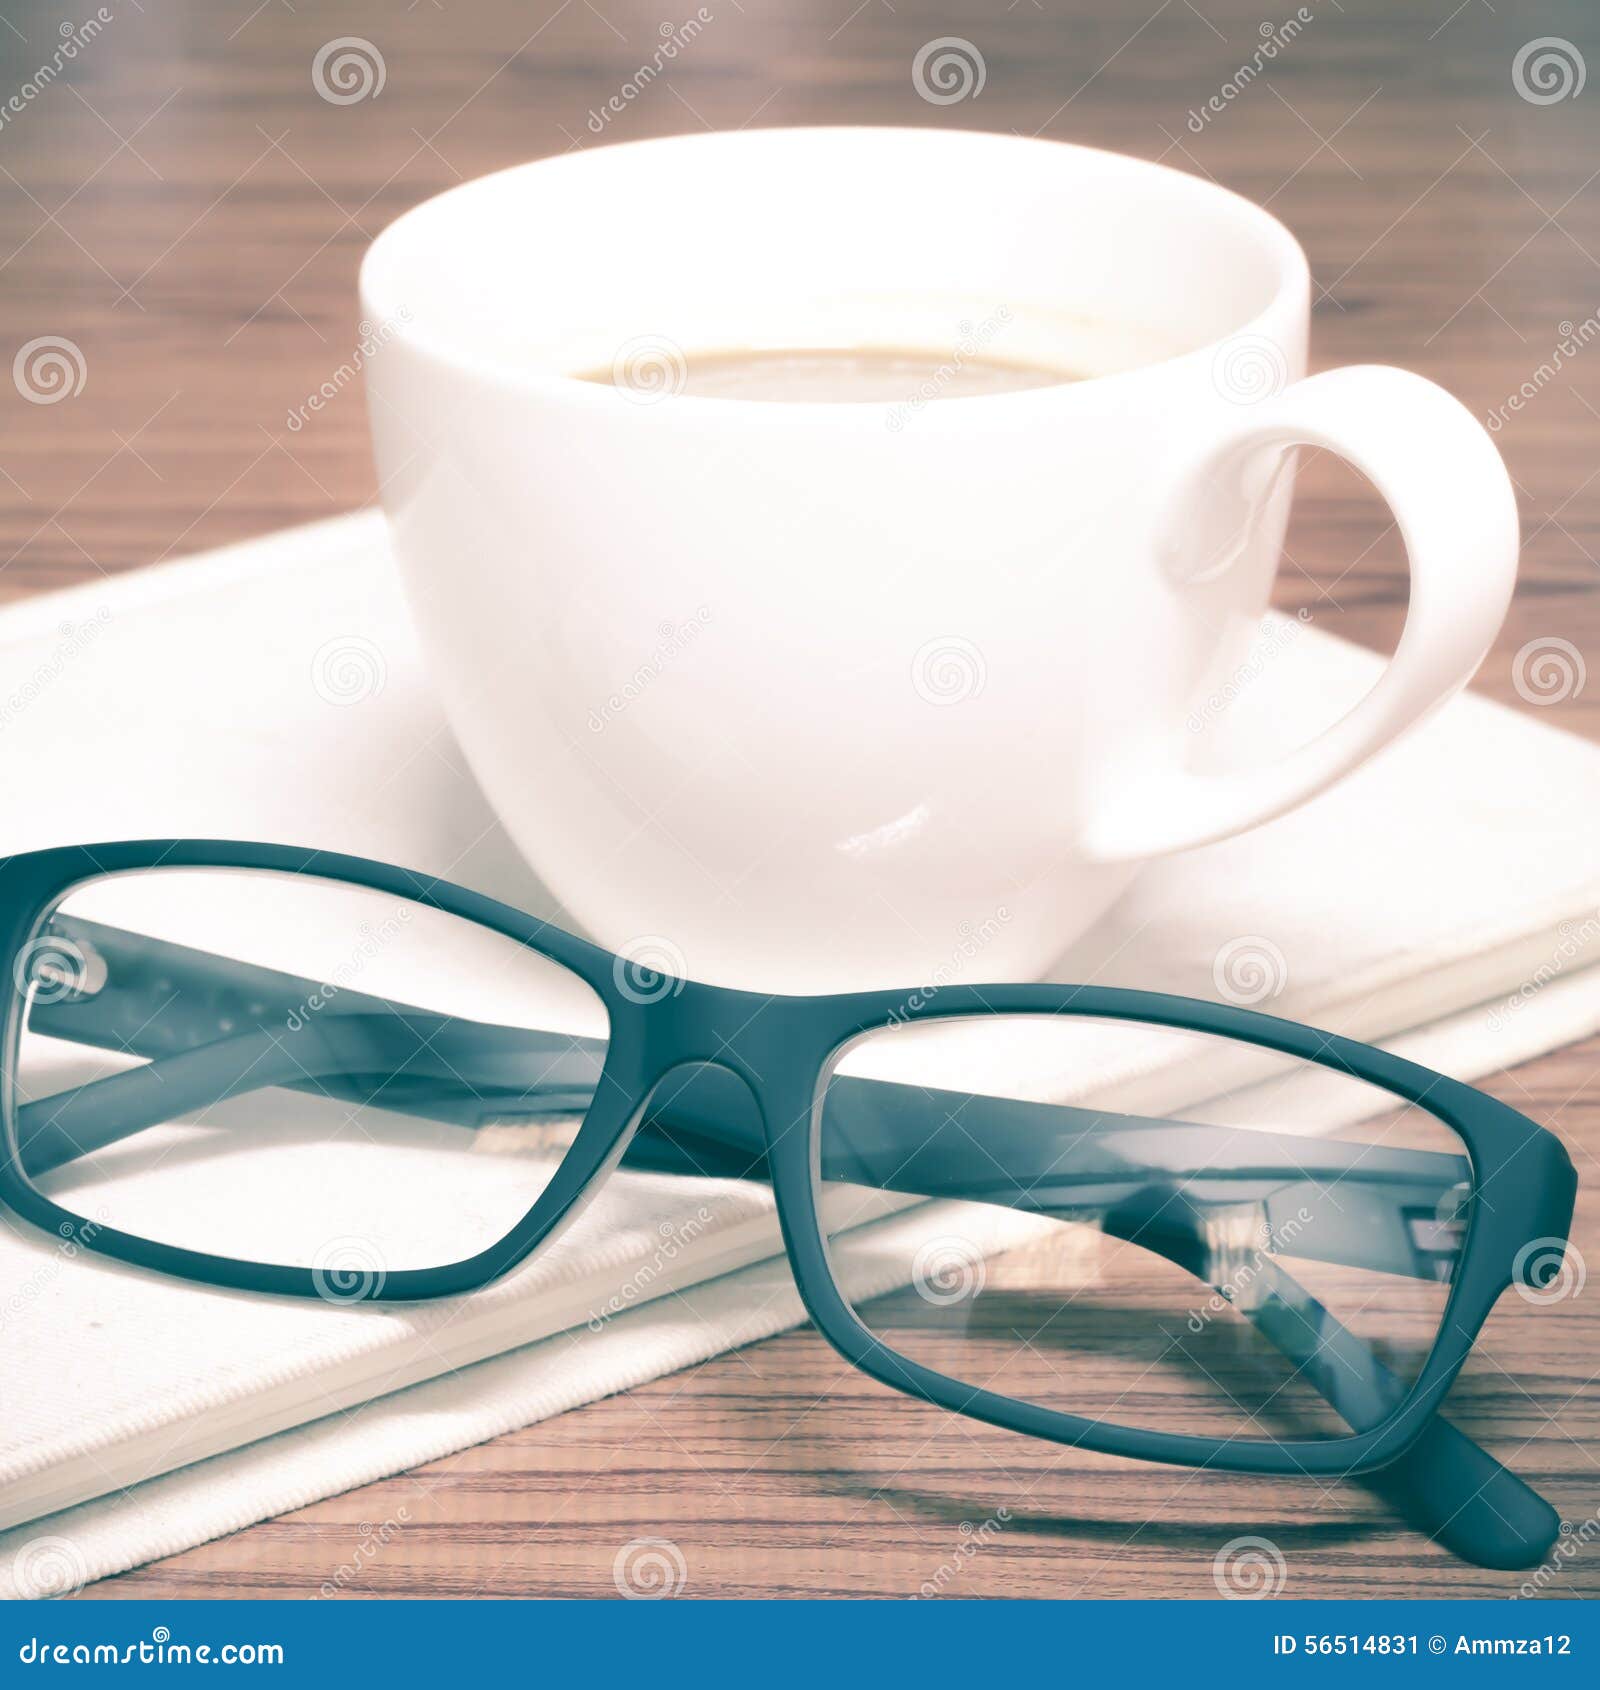 coffee cup and notebook with glasses